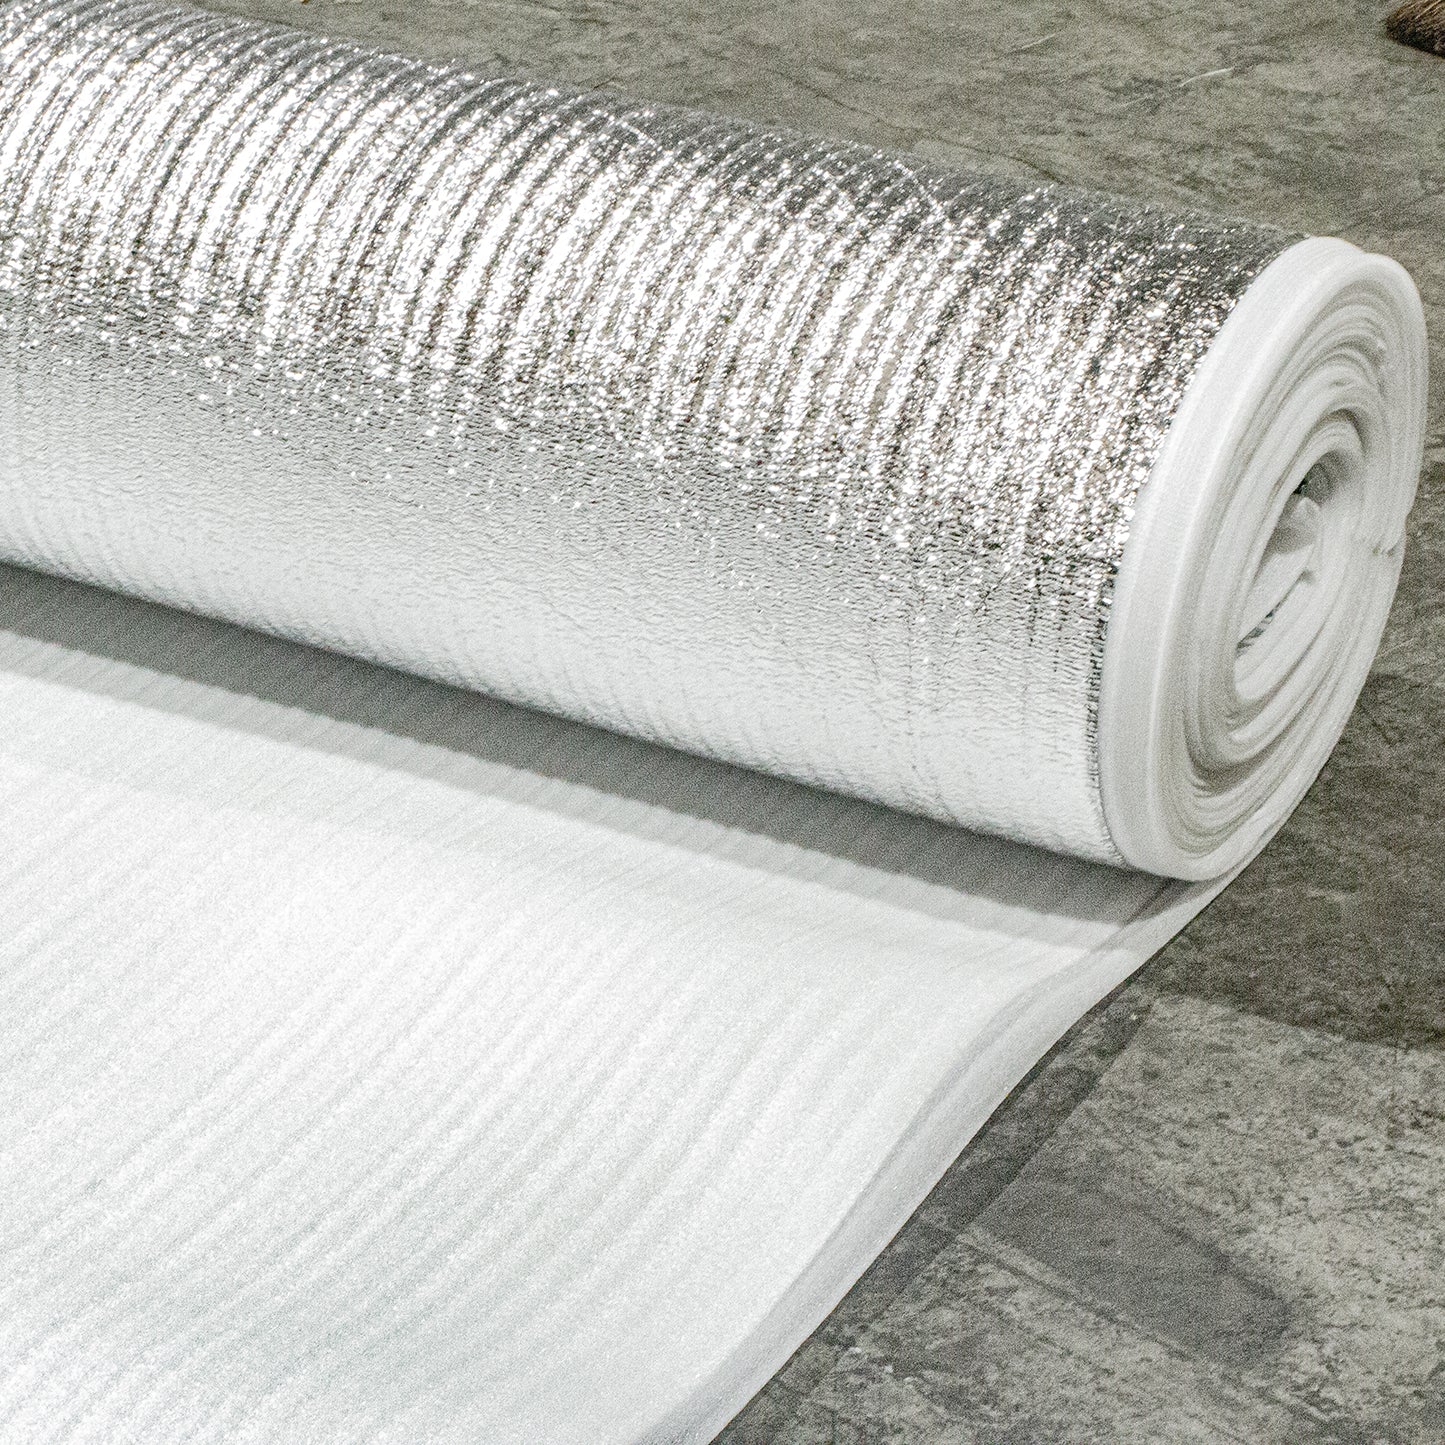 3mm 50sqm Silver Acoustic Underlay  Wood or Laminate Flooring Comfort Insulation